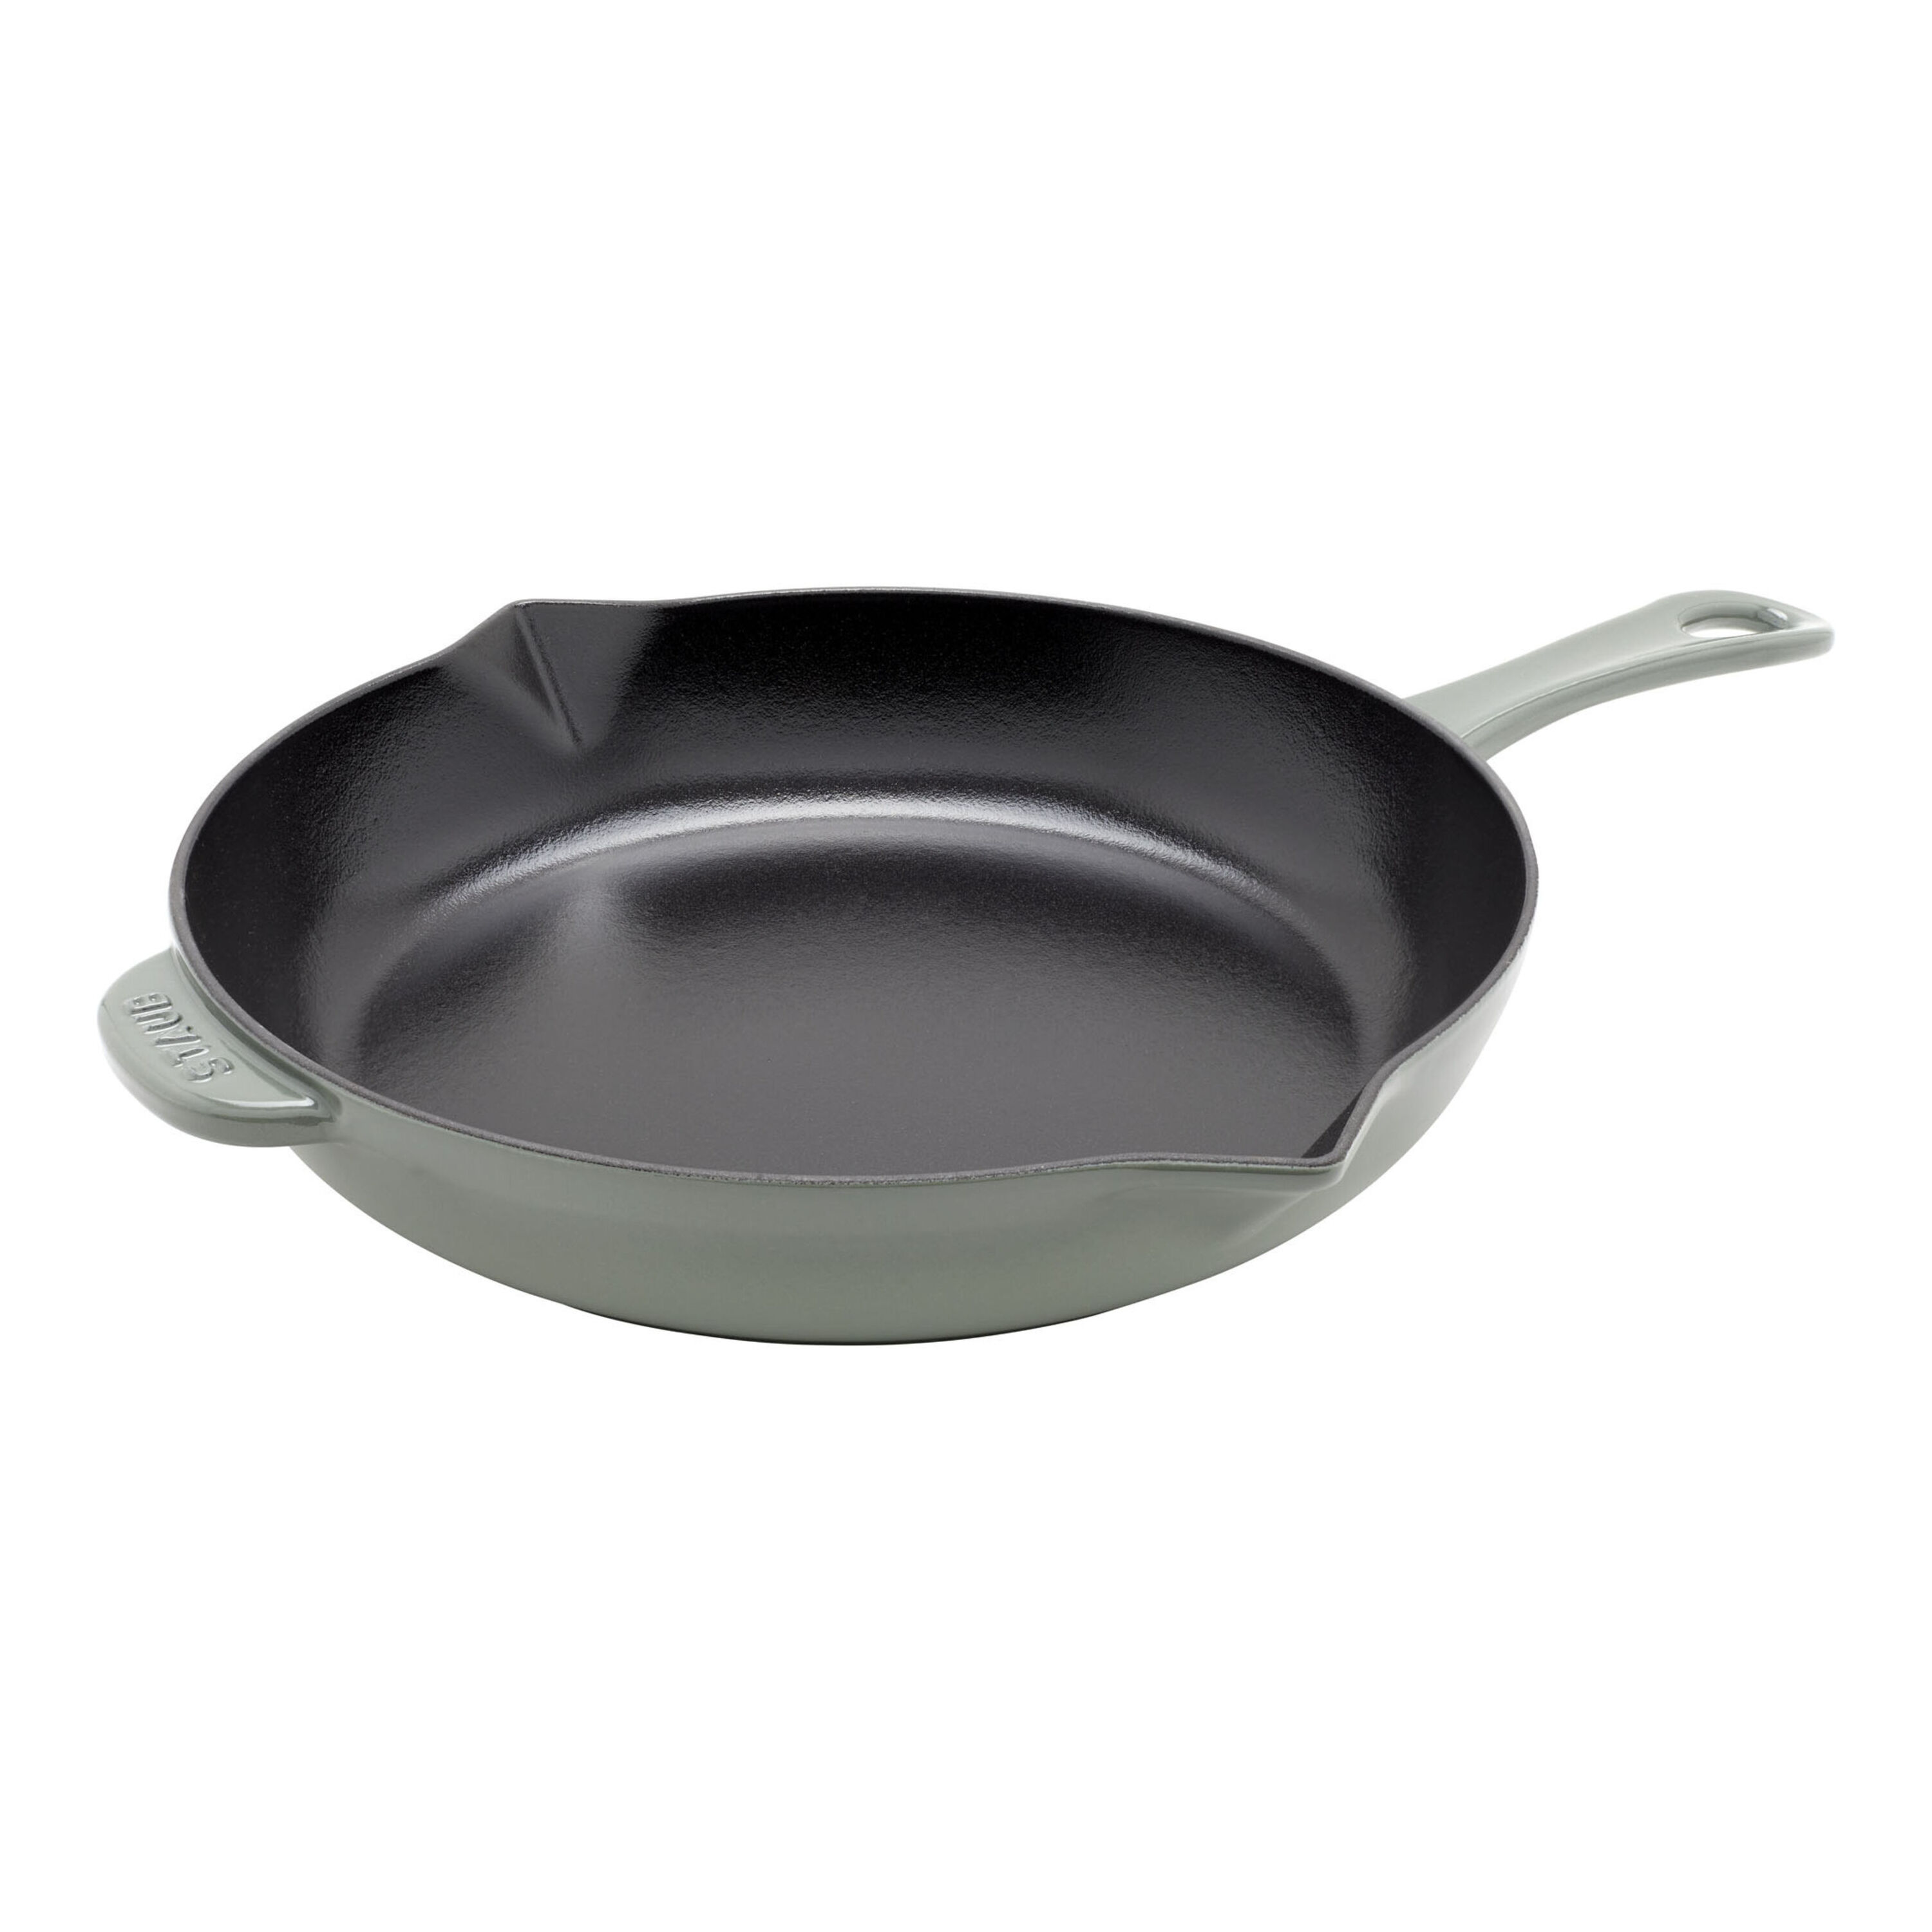 Cast Iron Fry Pan With Pour Spout, Round Fry Pan - Cast Iron